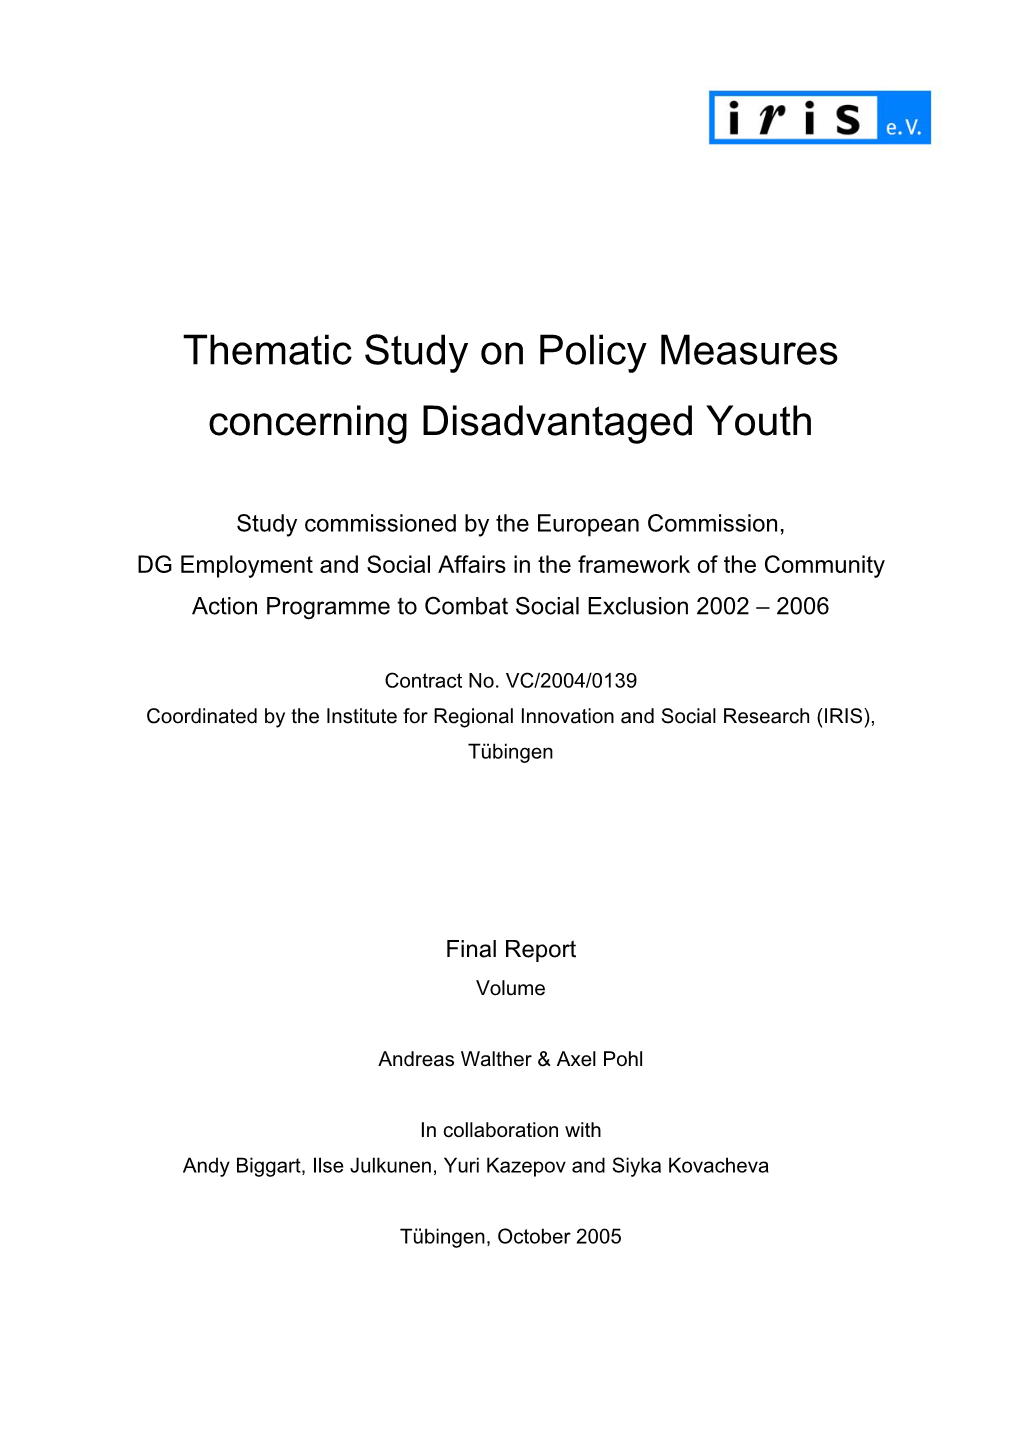 Thematic Study on Policy Measures Concerning Disadvantaged Youth